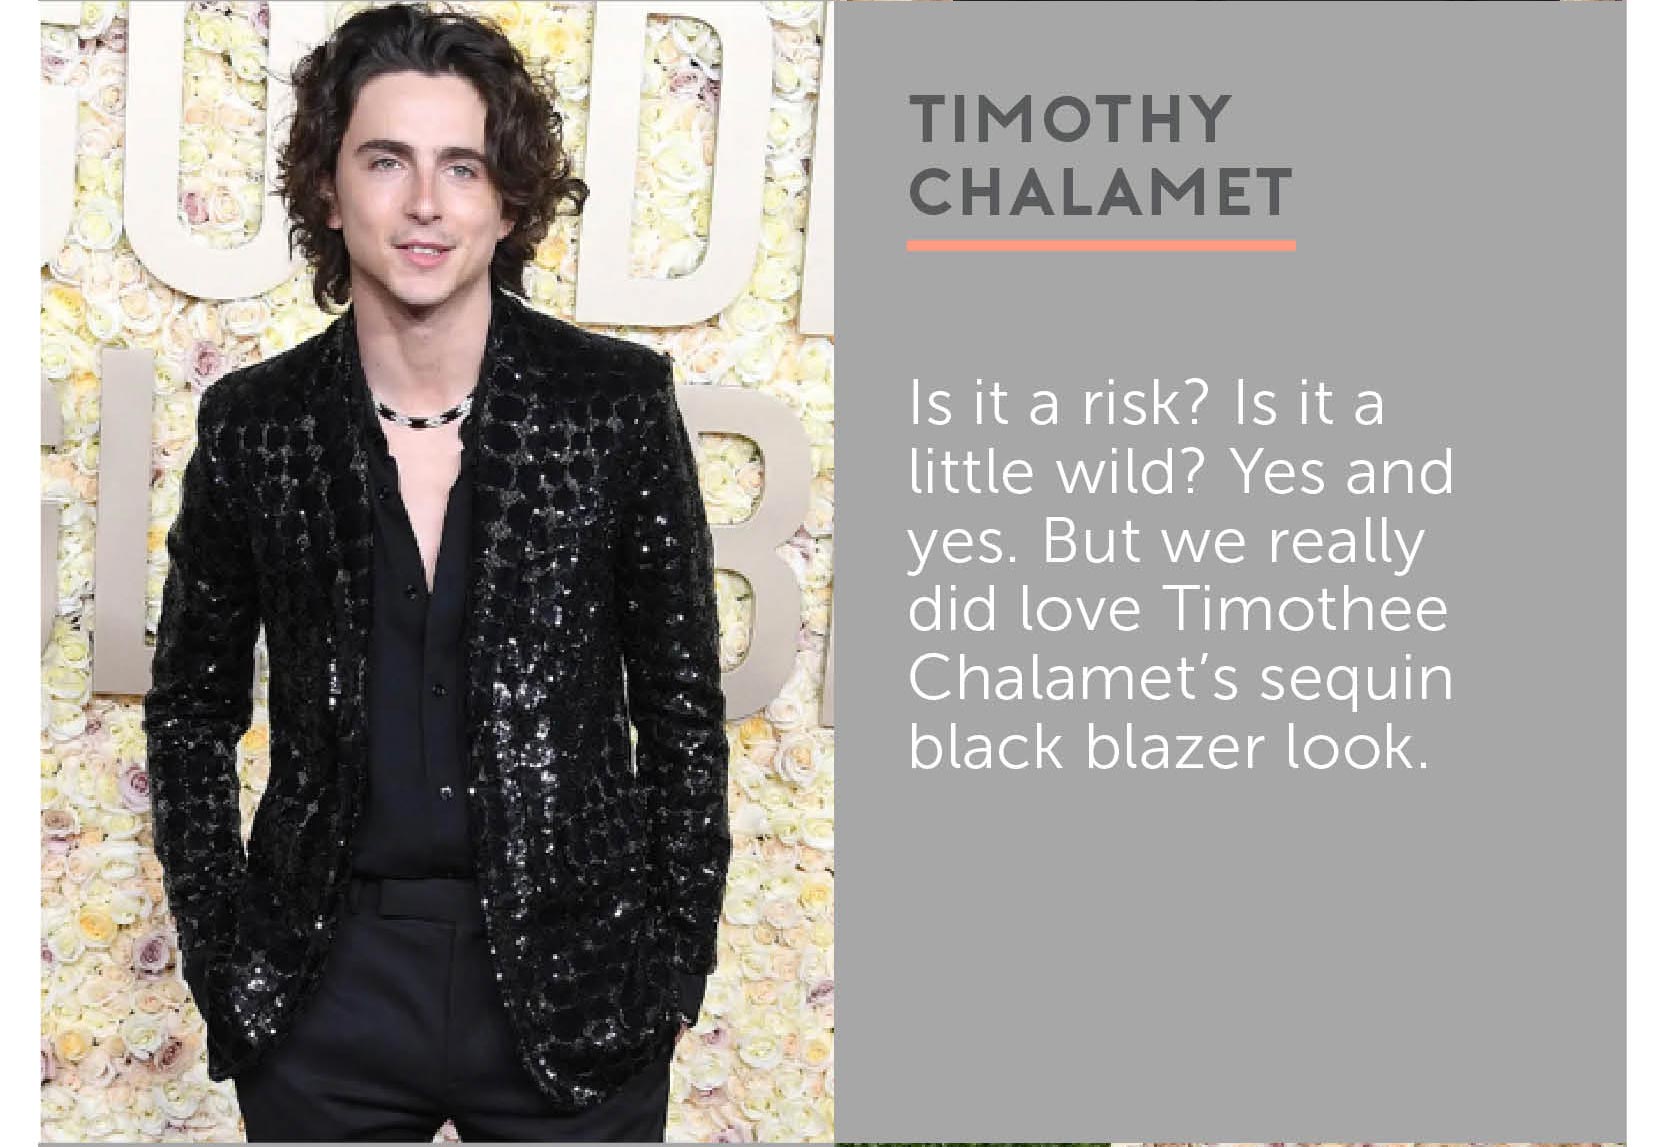 Is it a risk? Is it a little wild? Yes and yes. But we really did love Timothee Chalamet’s sequin black blazer look.